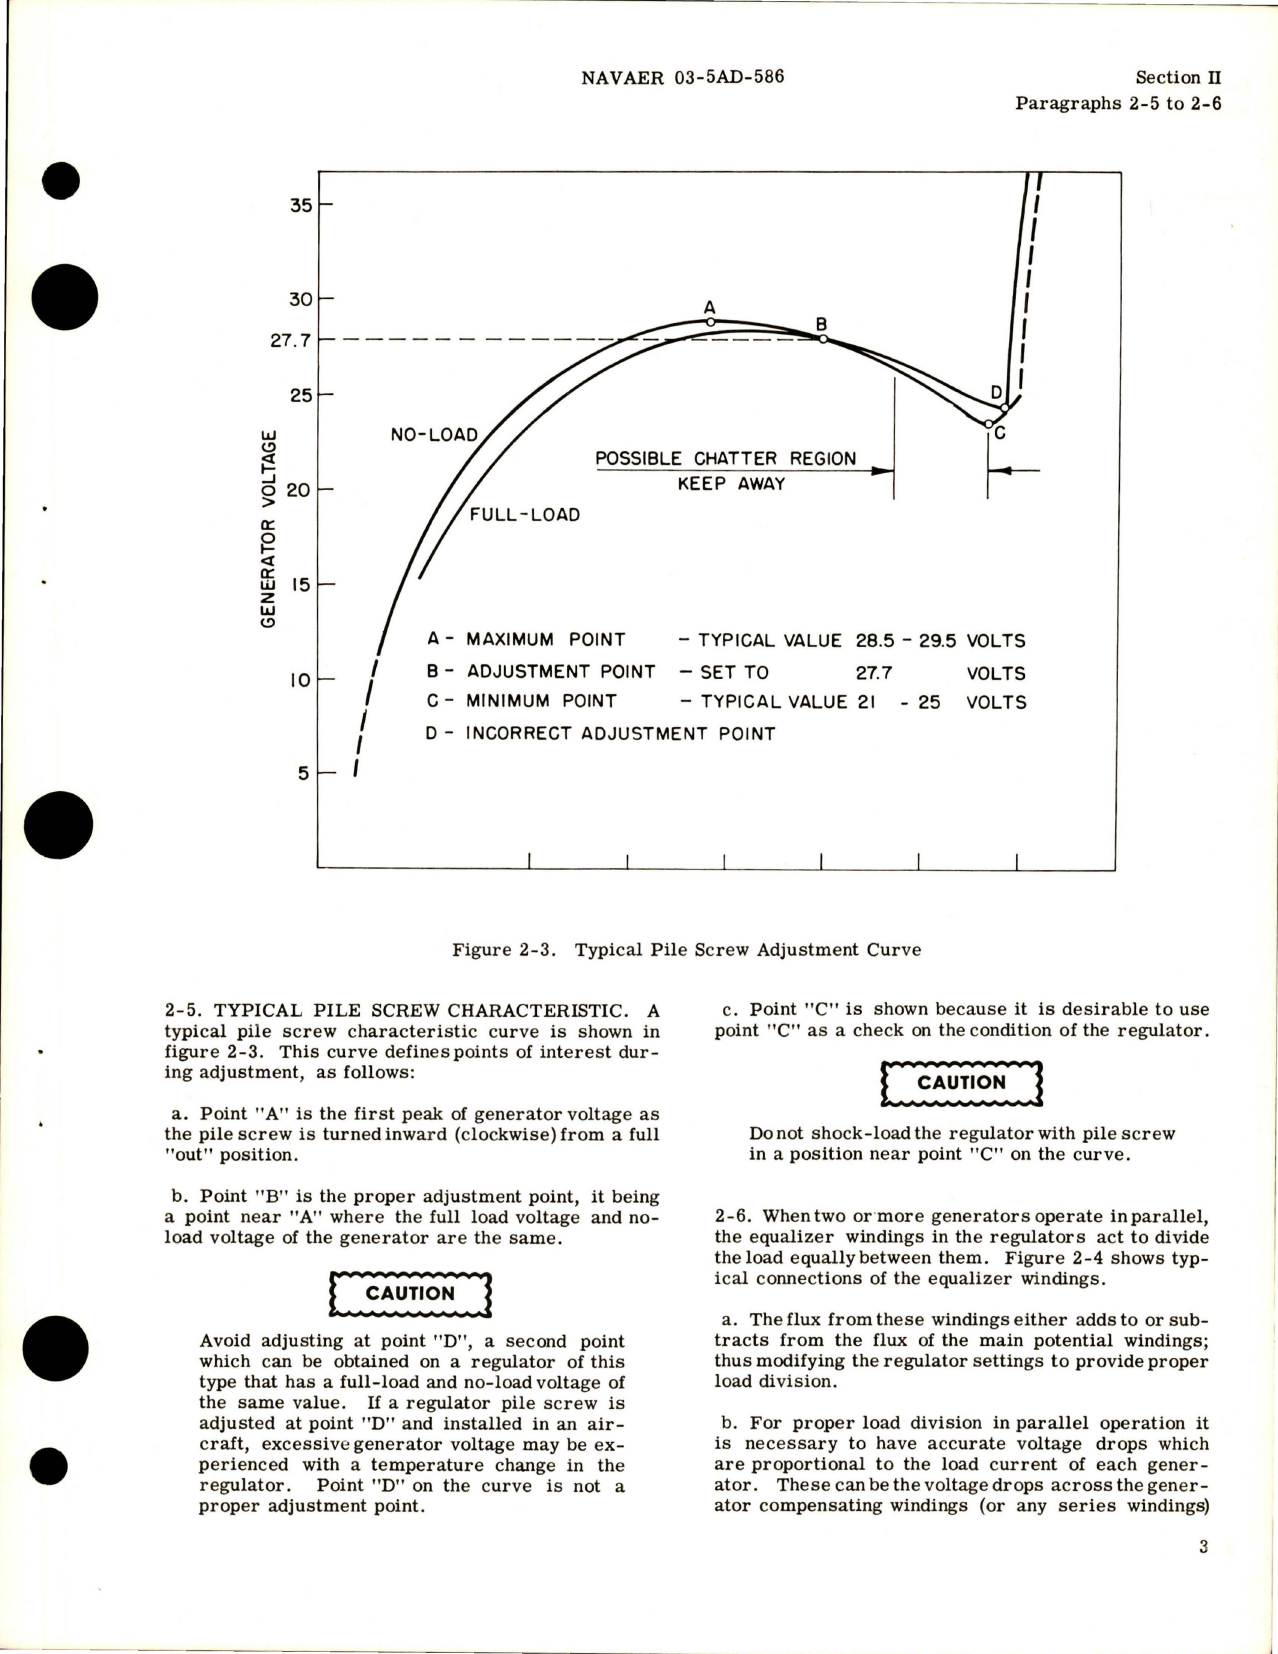 Sample page 7 from AirCorps Library document: Service and Overhaul Instructions for Generator Voltage Regulator - Model CR2795E100A1 